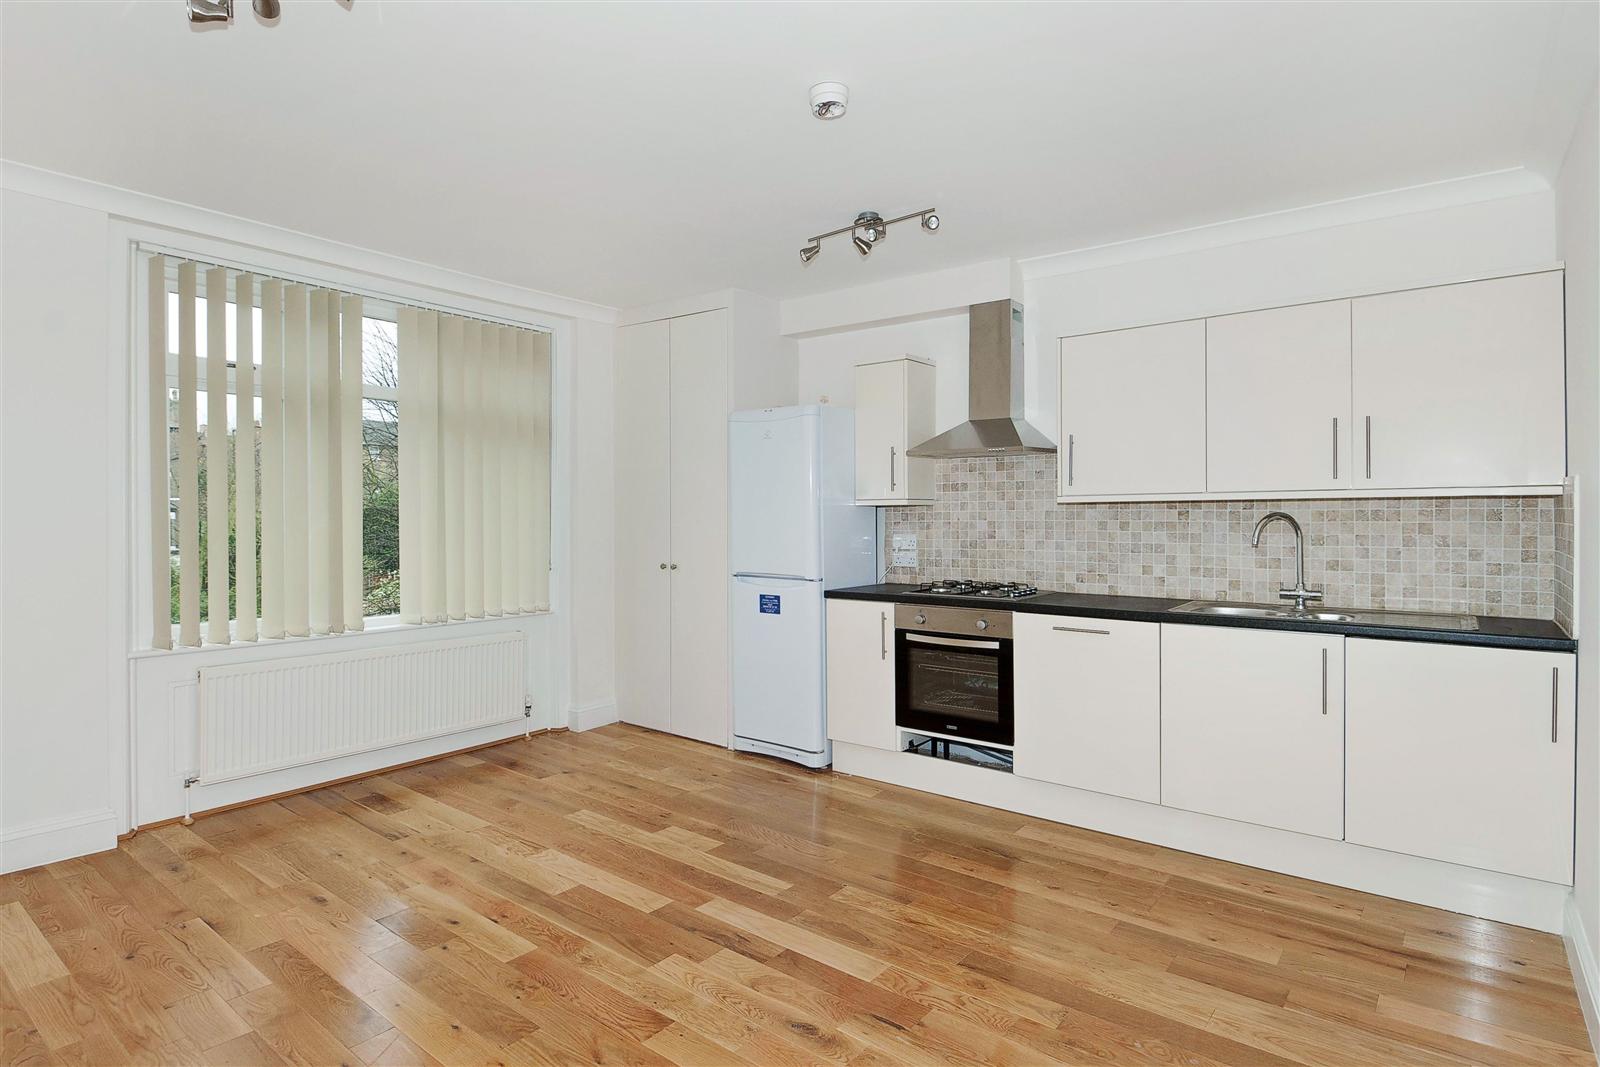 Forming part of a development of recently converted flats within a pair of  semi detached period houses is this stunning second and third floor SPLIT LEVEL 1052 sq.ft apartment. The accommodation comprises of THREE DOUBLE BEDROOMS, open plan reception/kitchen leading to exclusive use of a south ...